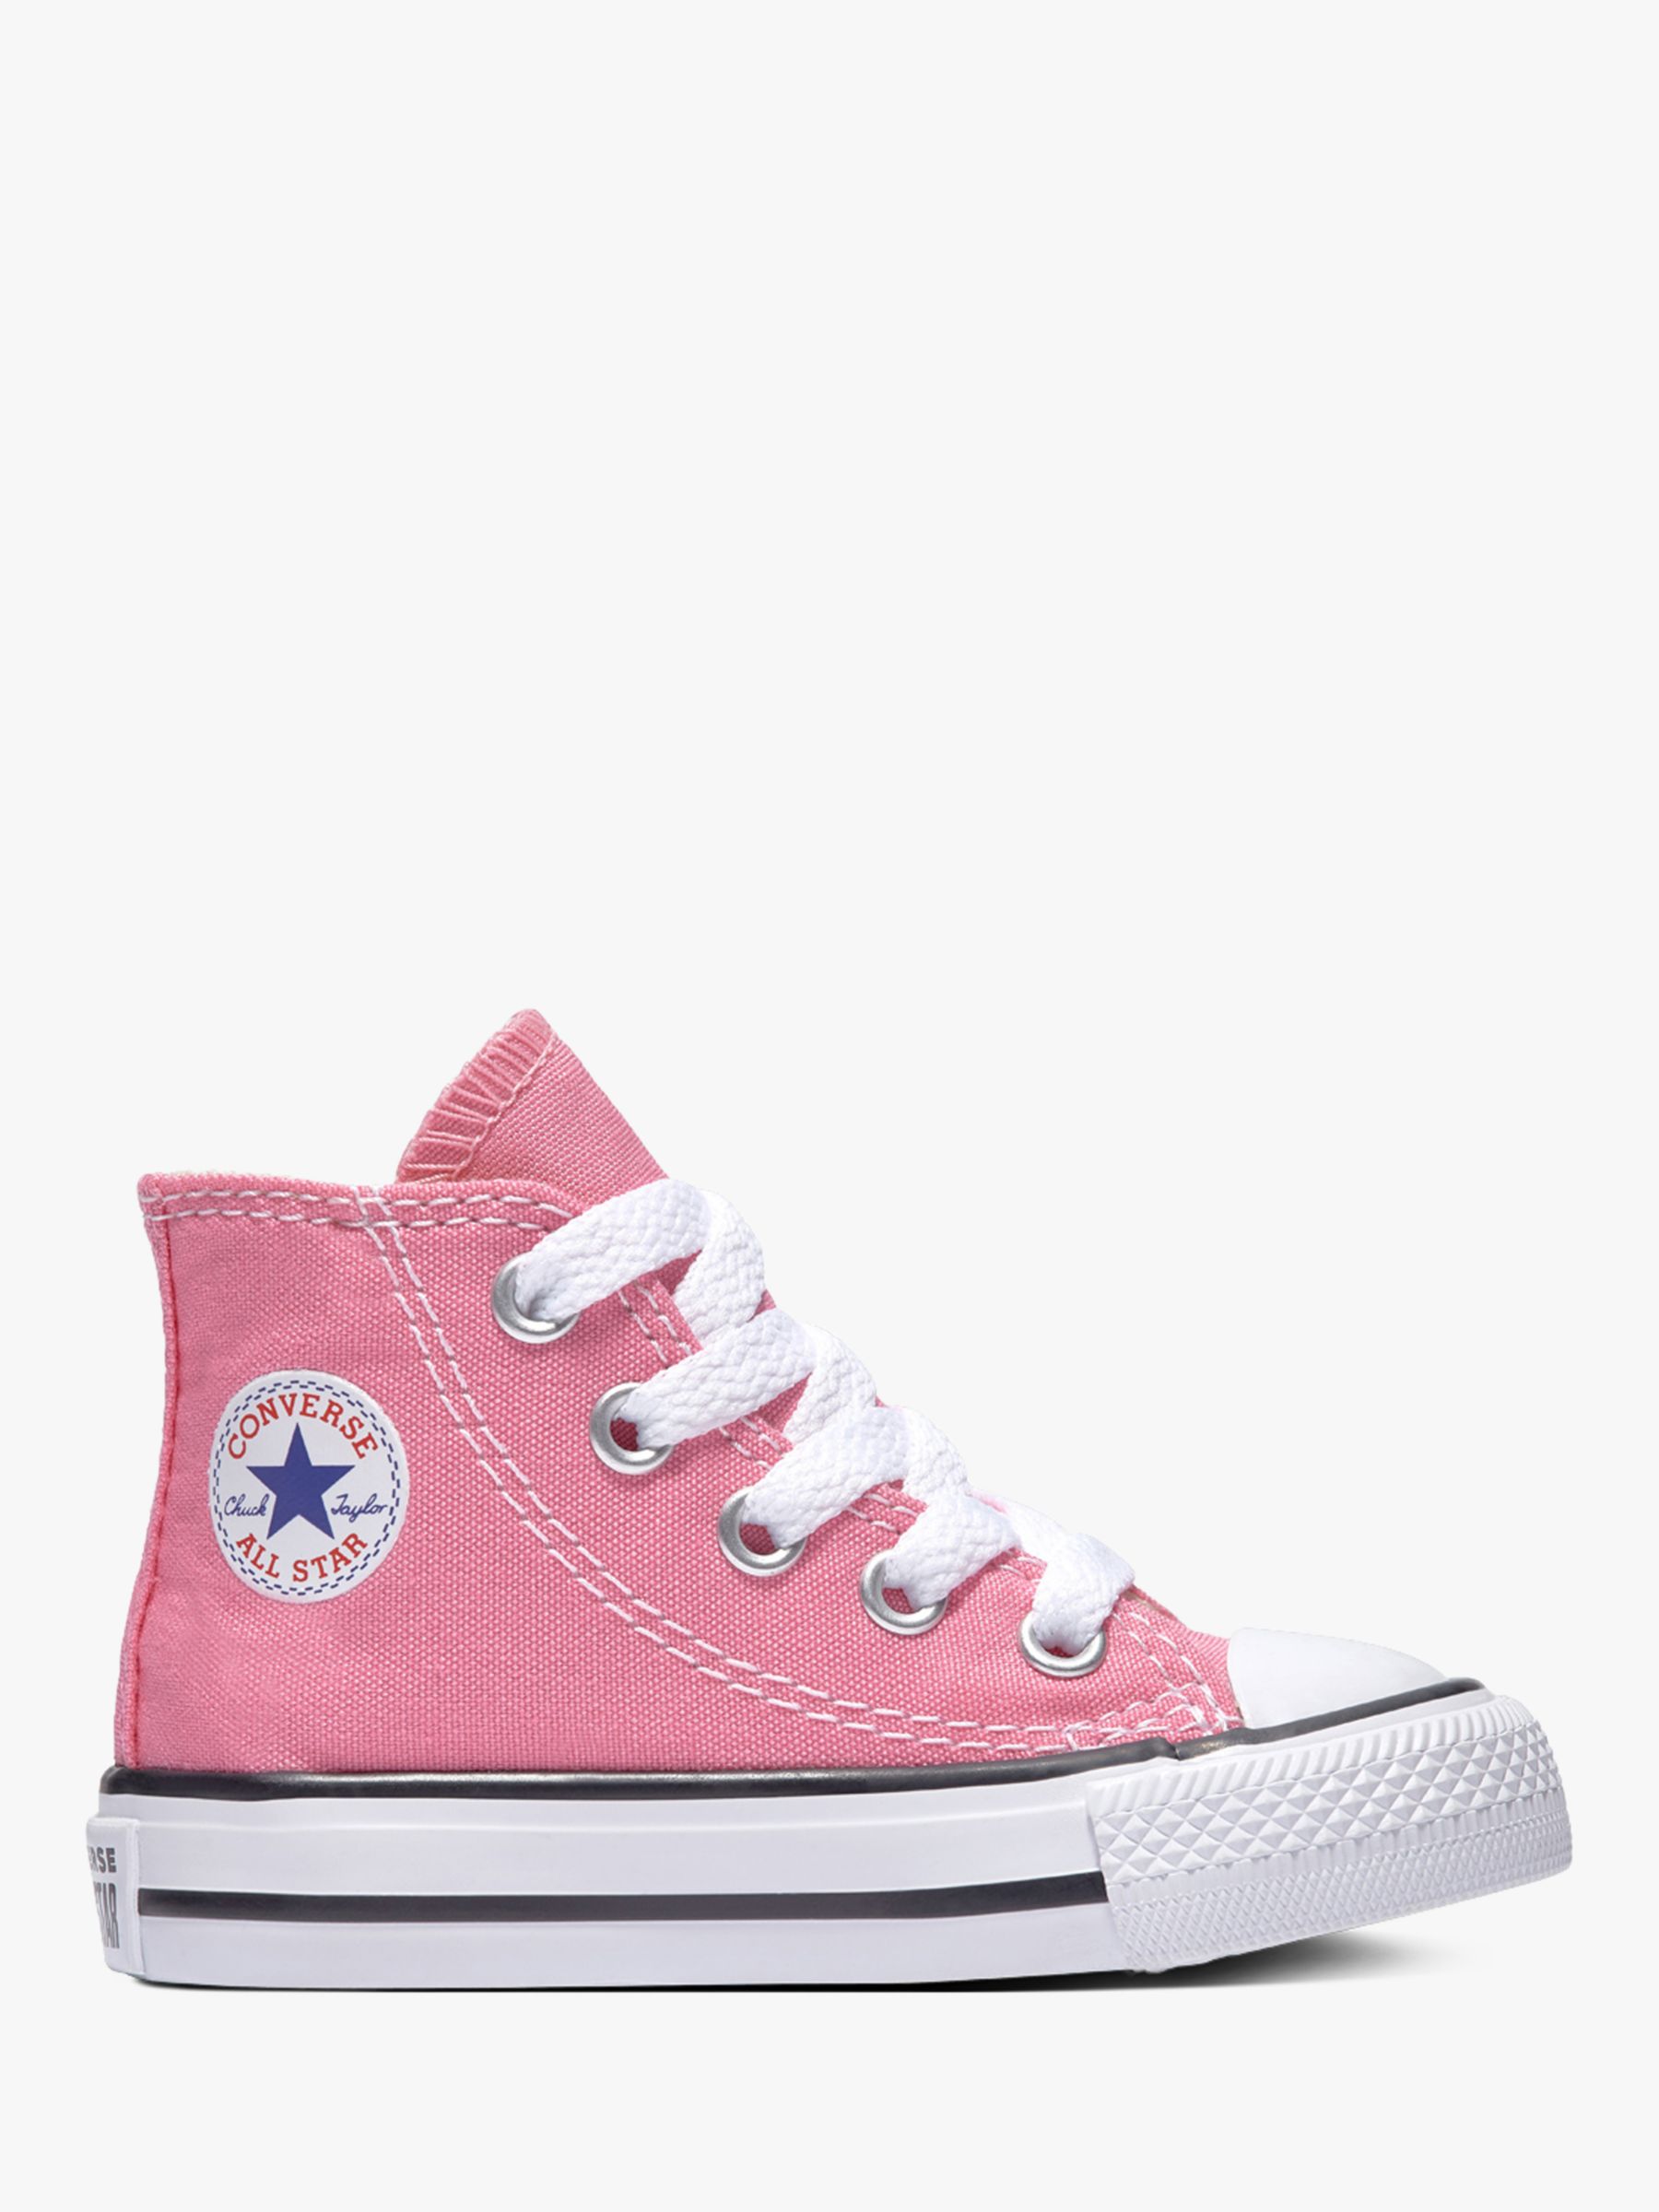 Converse Kids' Chuck Taylor All Star Core Hi-Top Trainers, Pink